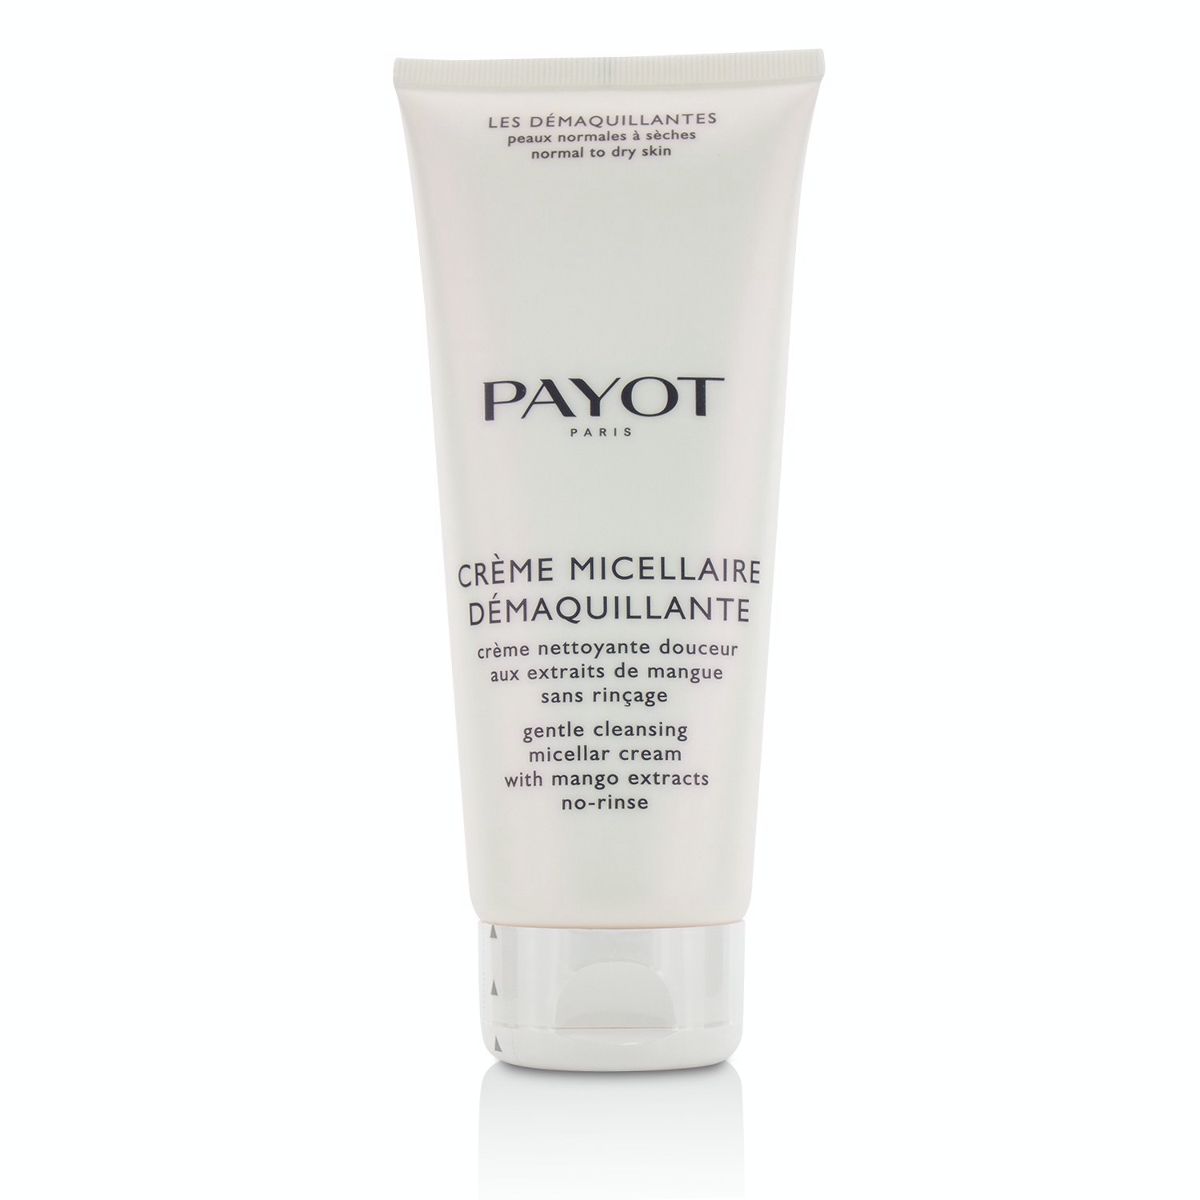 Les Demaquillantes Creme Micellaire Demaquillante Gentle Cleansing Micellar Cream (Normal to Dry Skin) Payot Image